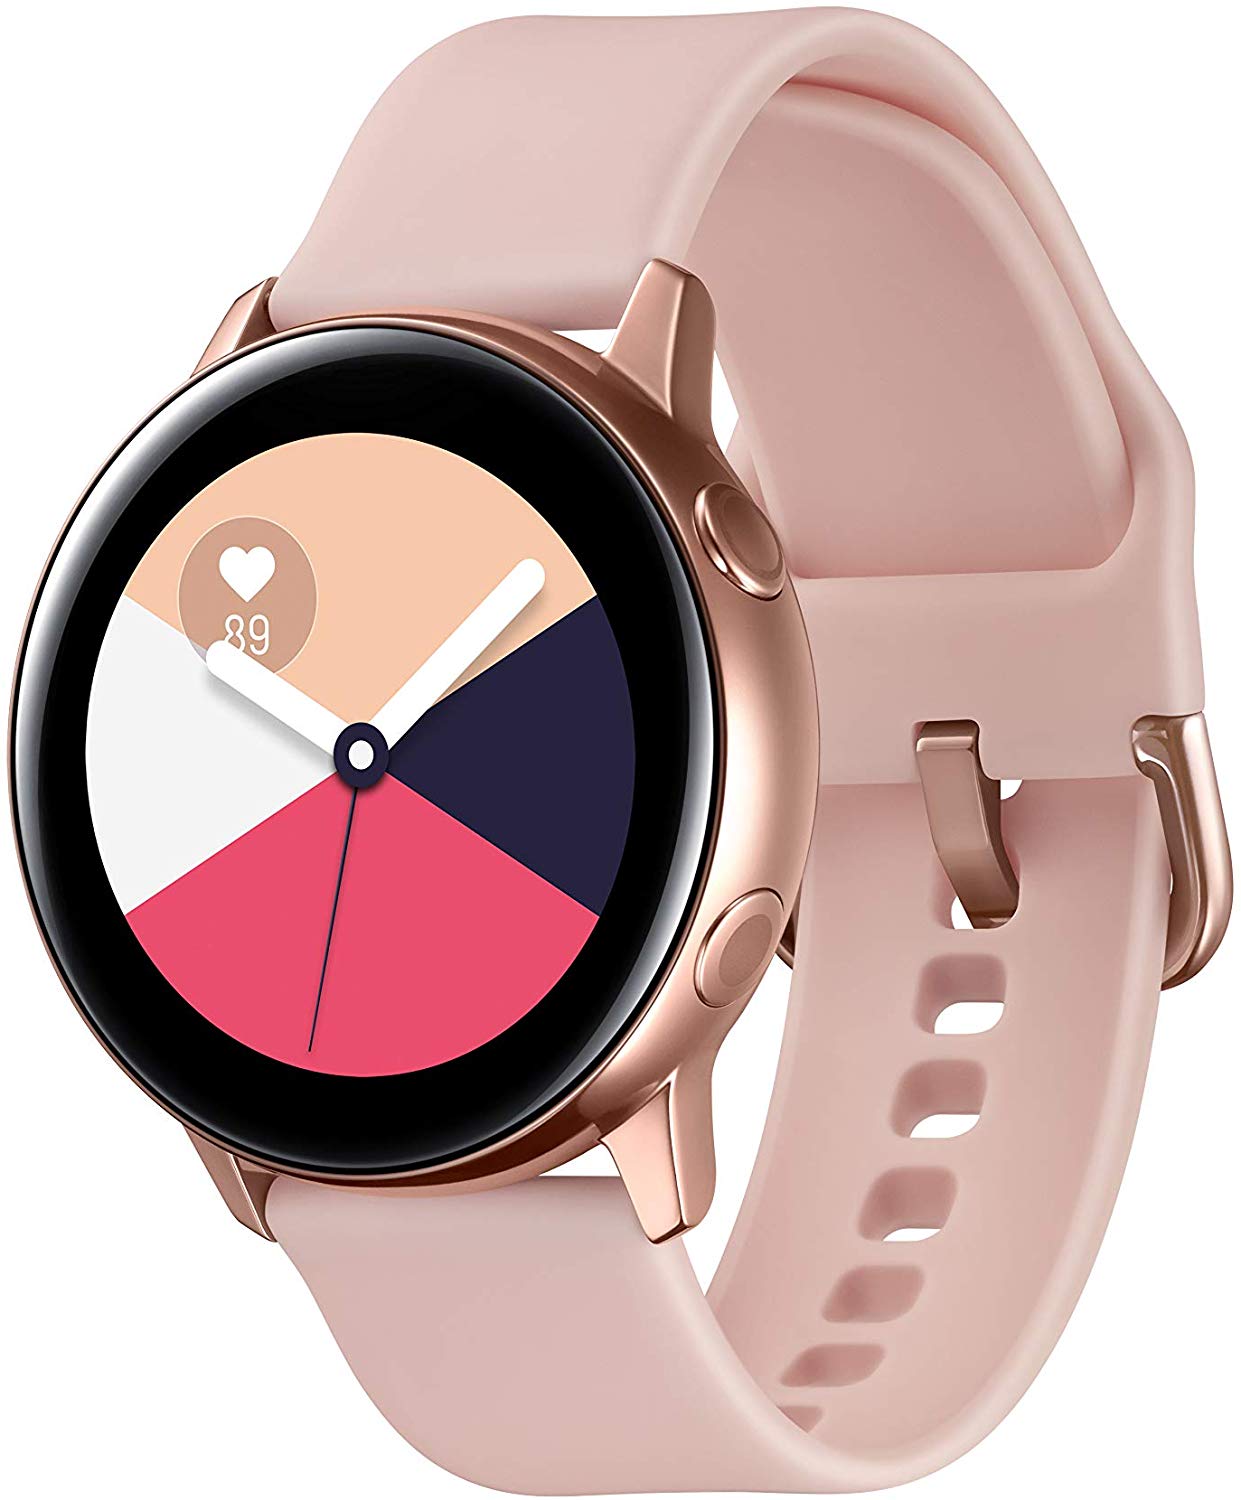 Samsung Galaxy Watch Active Full Specifications, Features and Price - Geeky  Wrist